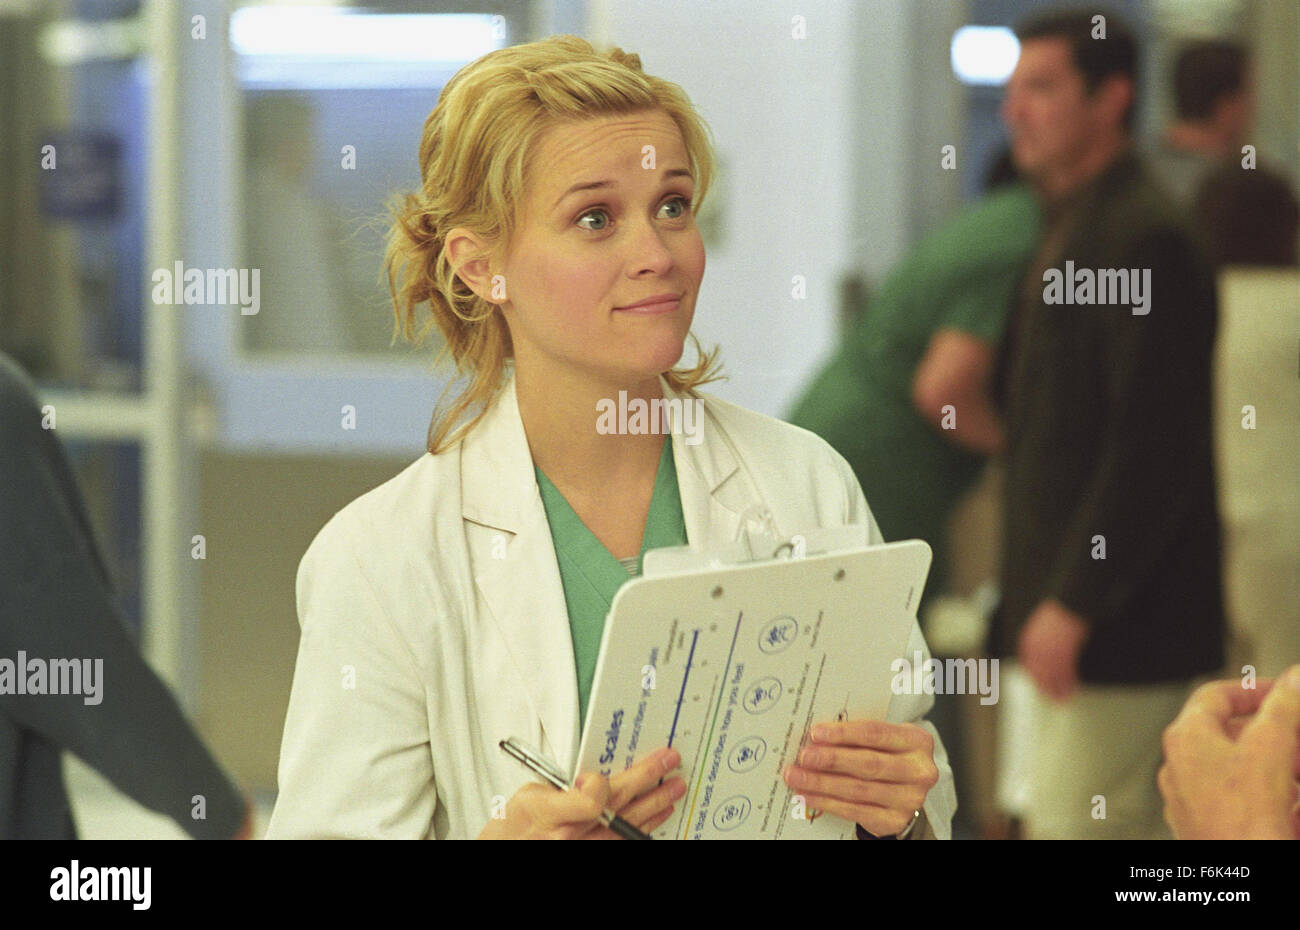 RELEASE DATE: September 16, 2005. MOVIE TITLE: Just Like Heaven. STUDIO: DreamWorks SKG. PLOT: A lonely landscape architect (Ruffalo) falls for the spirit of beautiful woman (Witherspoon) who used to live in his new apartment. PICTURED: REESE WITHERSPOON stars as Elizabeth Martinson. Stock Photo